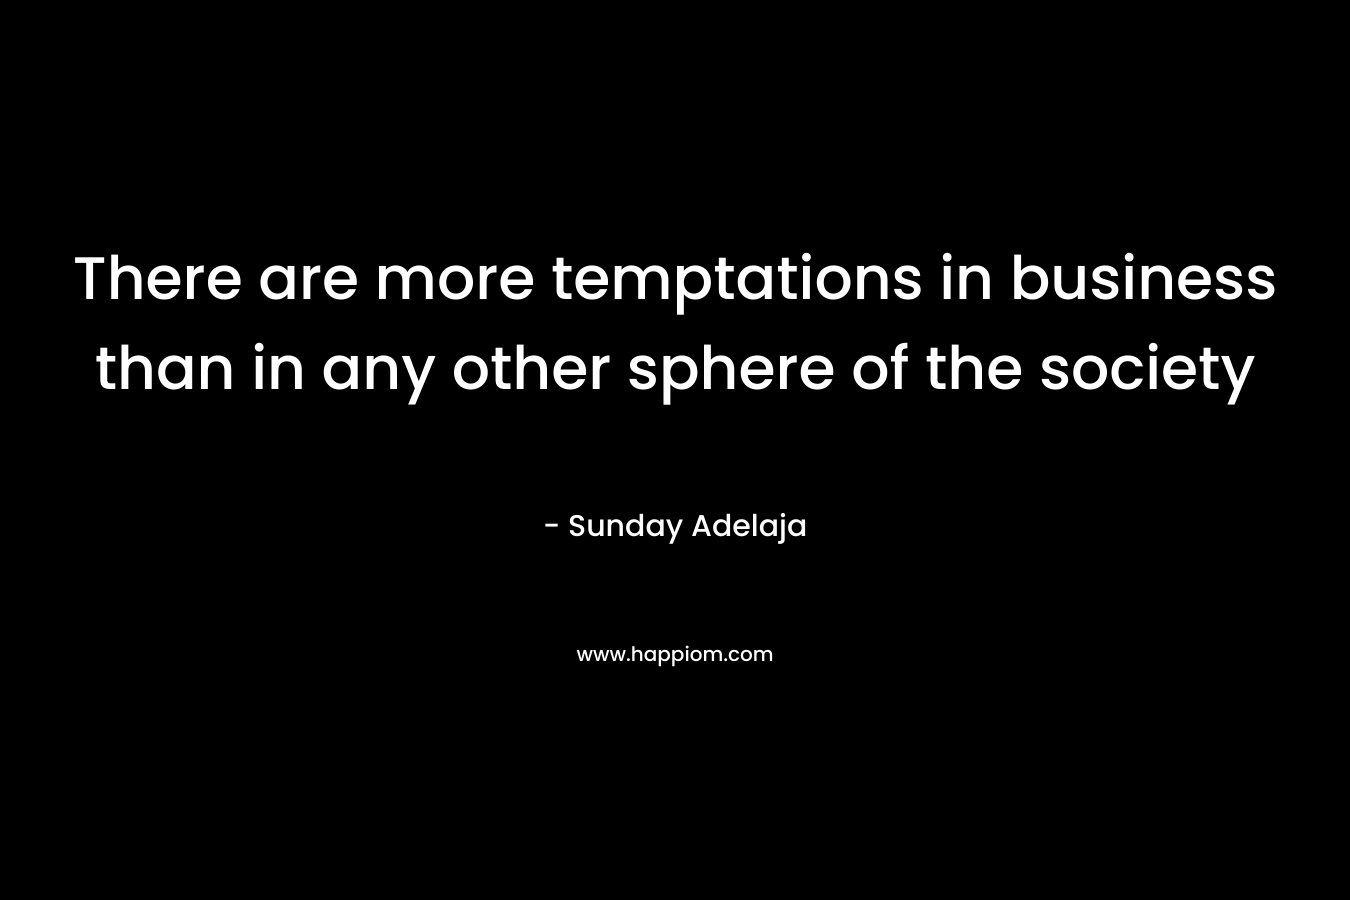 There are more temptations in business than in any other sphere of the society